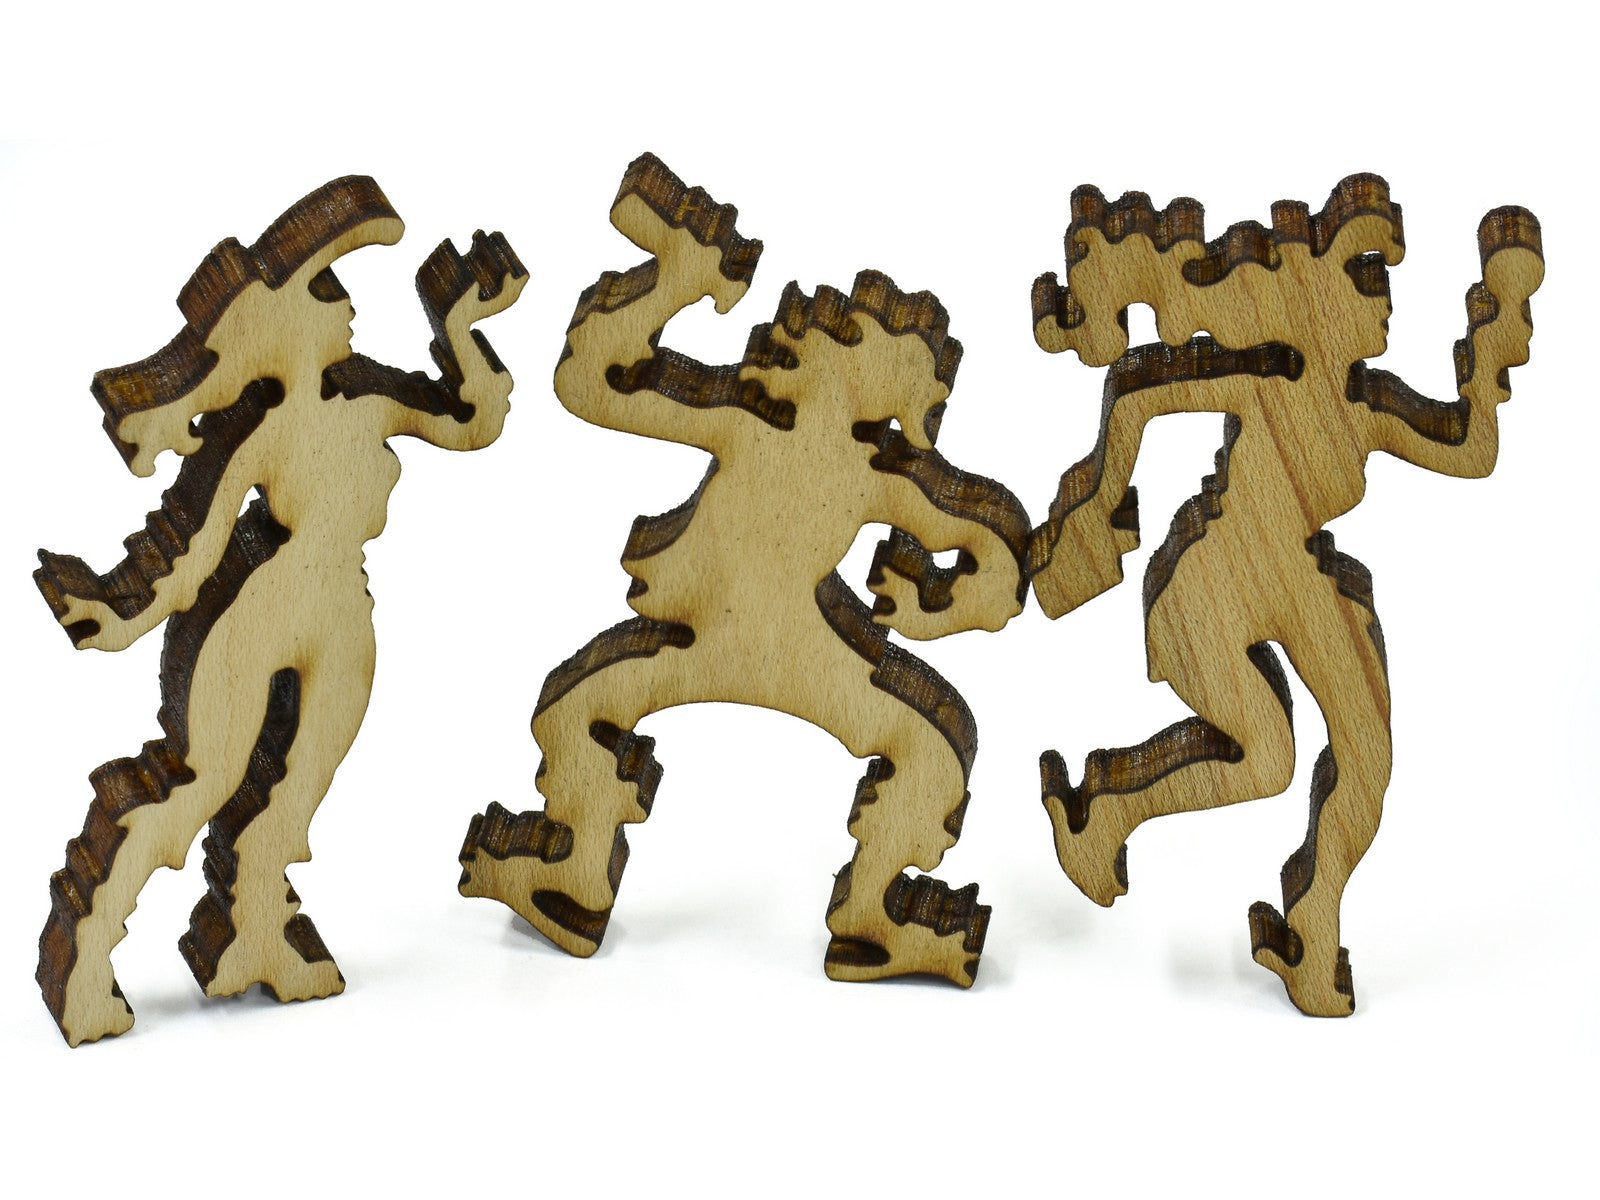 A closeup of pieces in the shape of three people dancing.